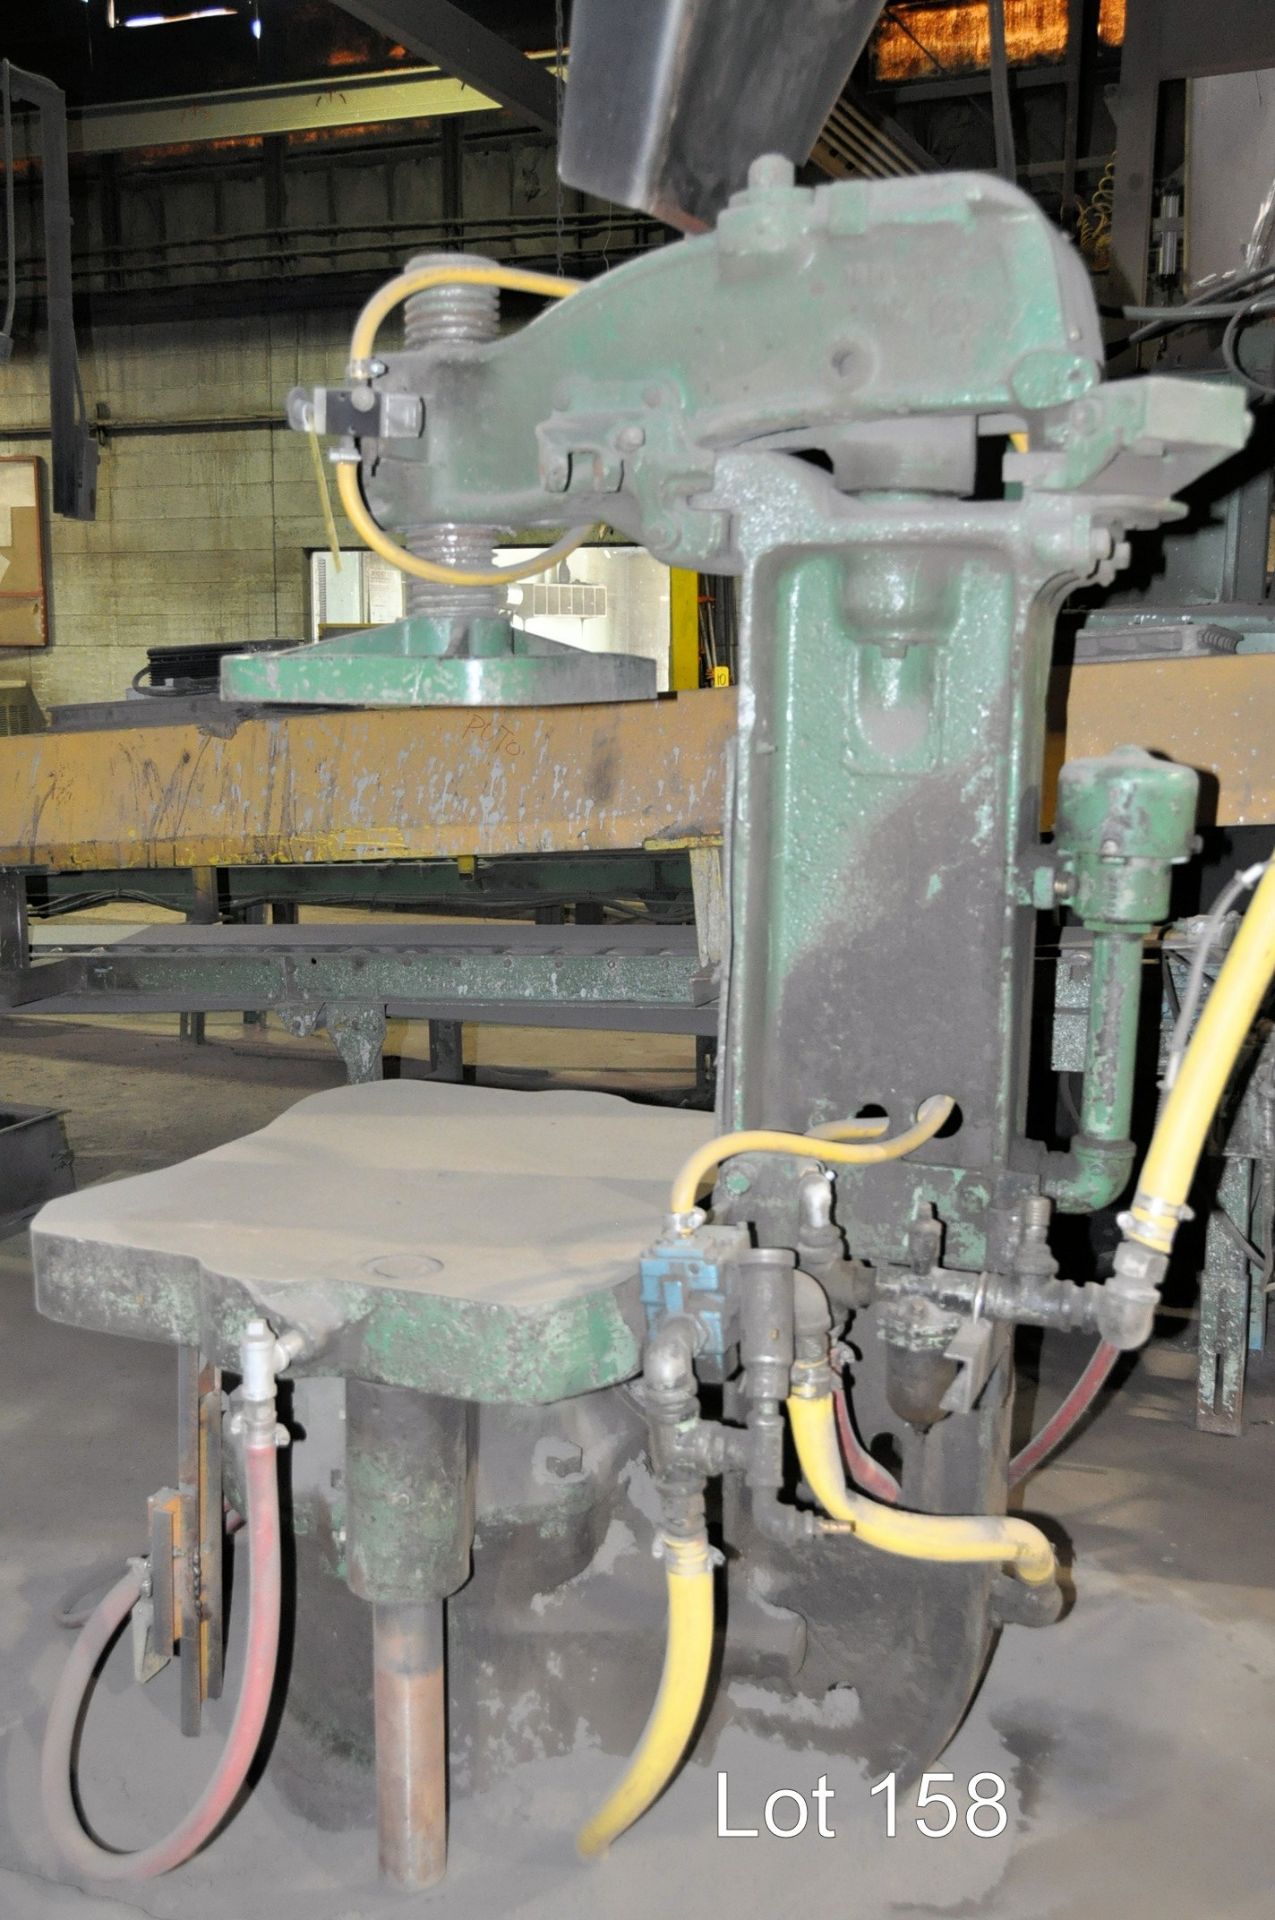 MILWAUKEE Jolt Squeeze Green Sand Molding Machine, S/N 18030, 24'' x 30'' Table Size - Image 2 of 2